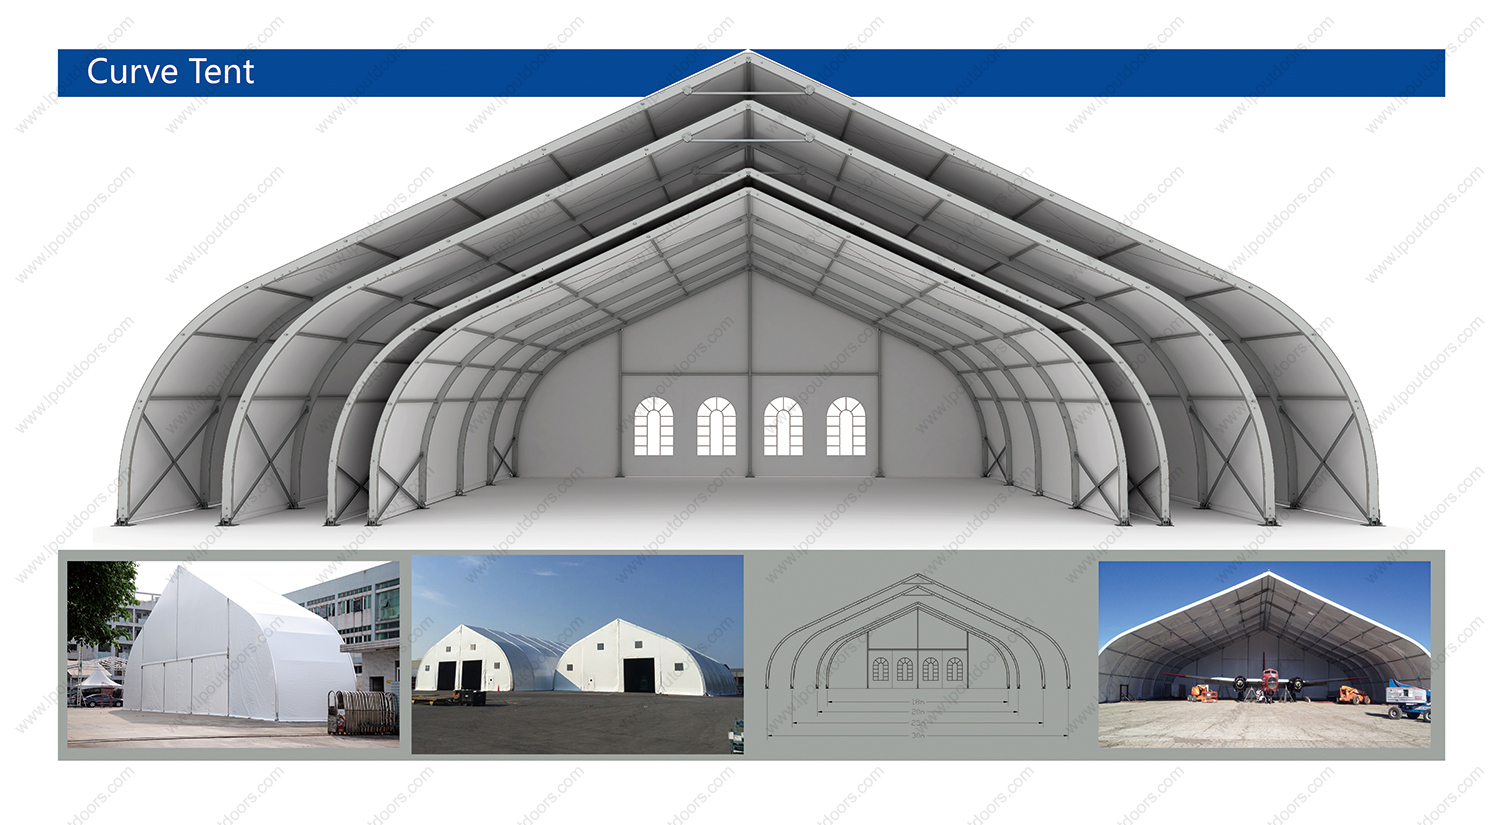 Arch curve tent series